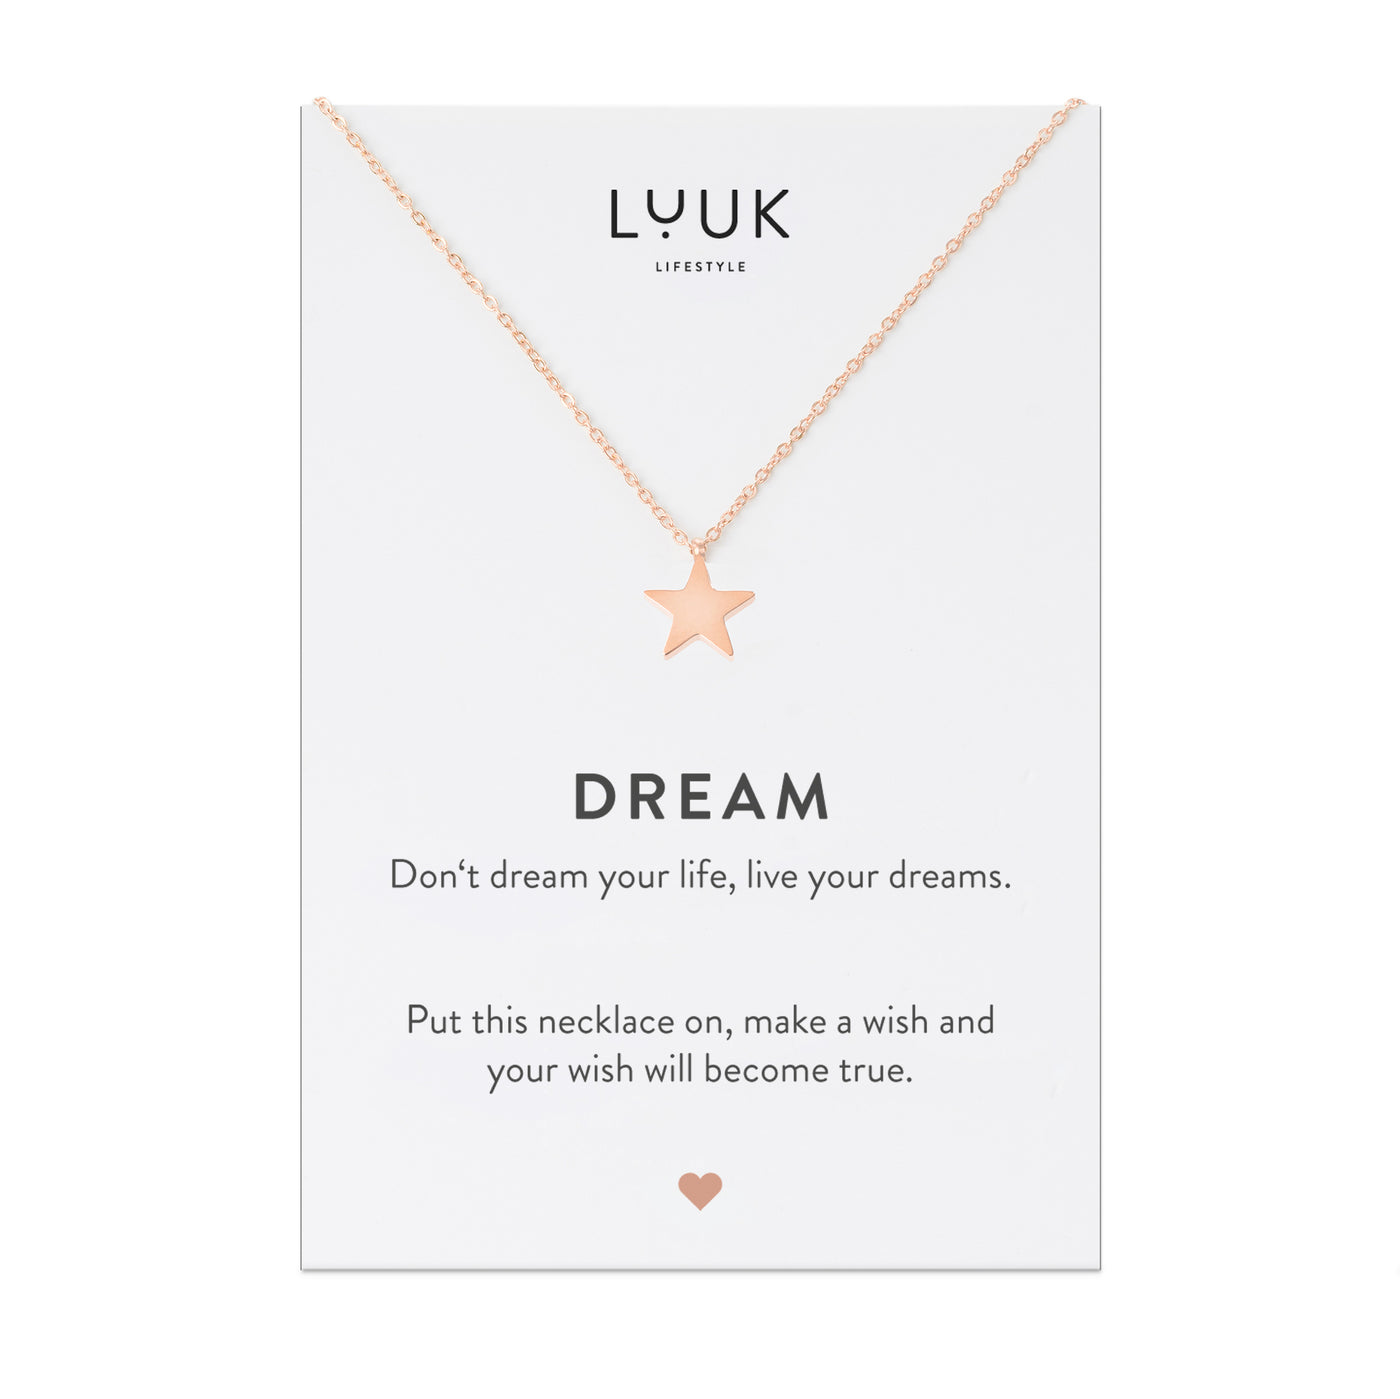 Necklace with star pendant and Dream greeting card